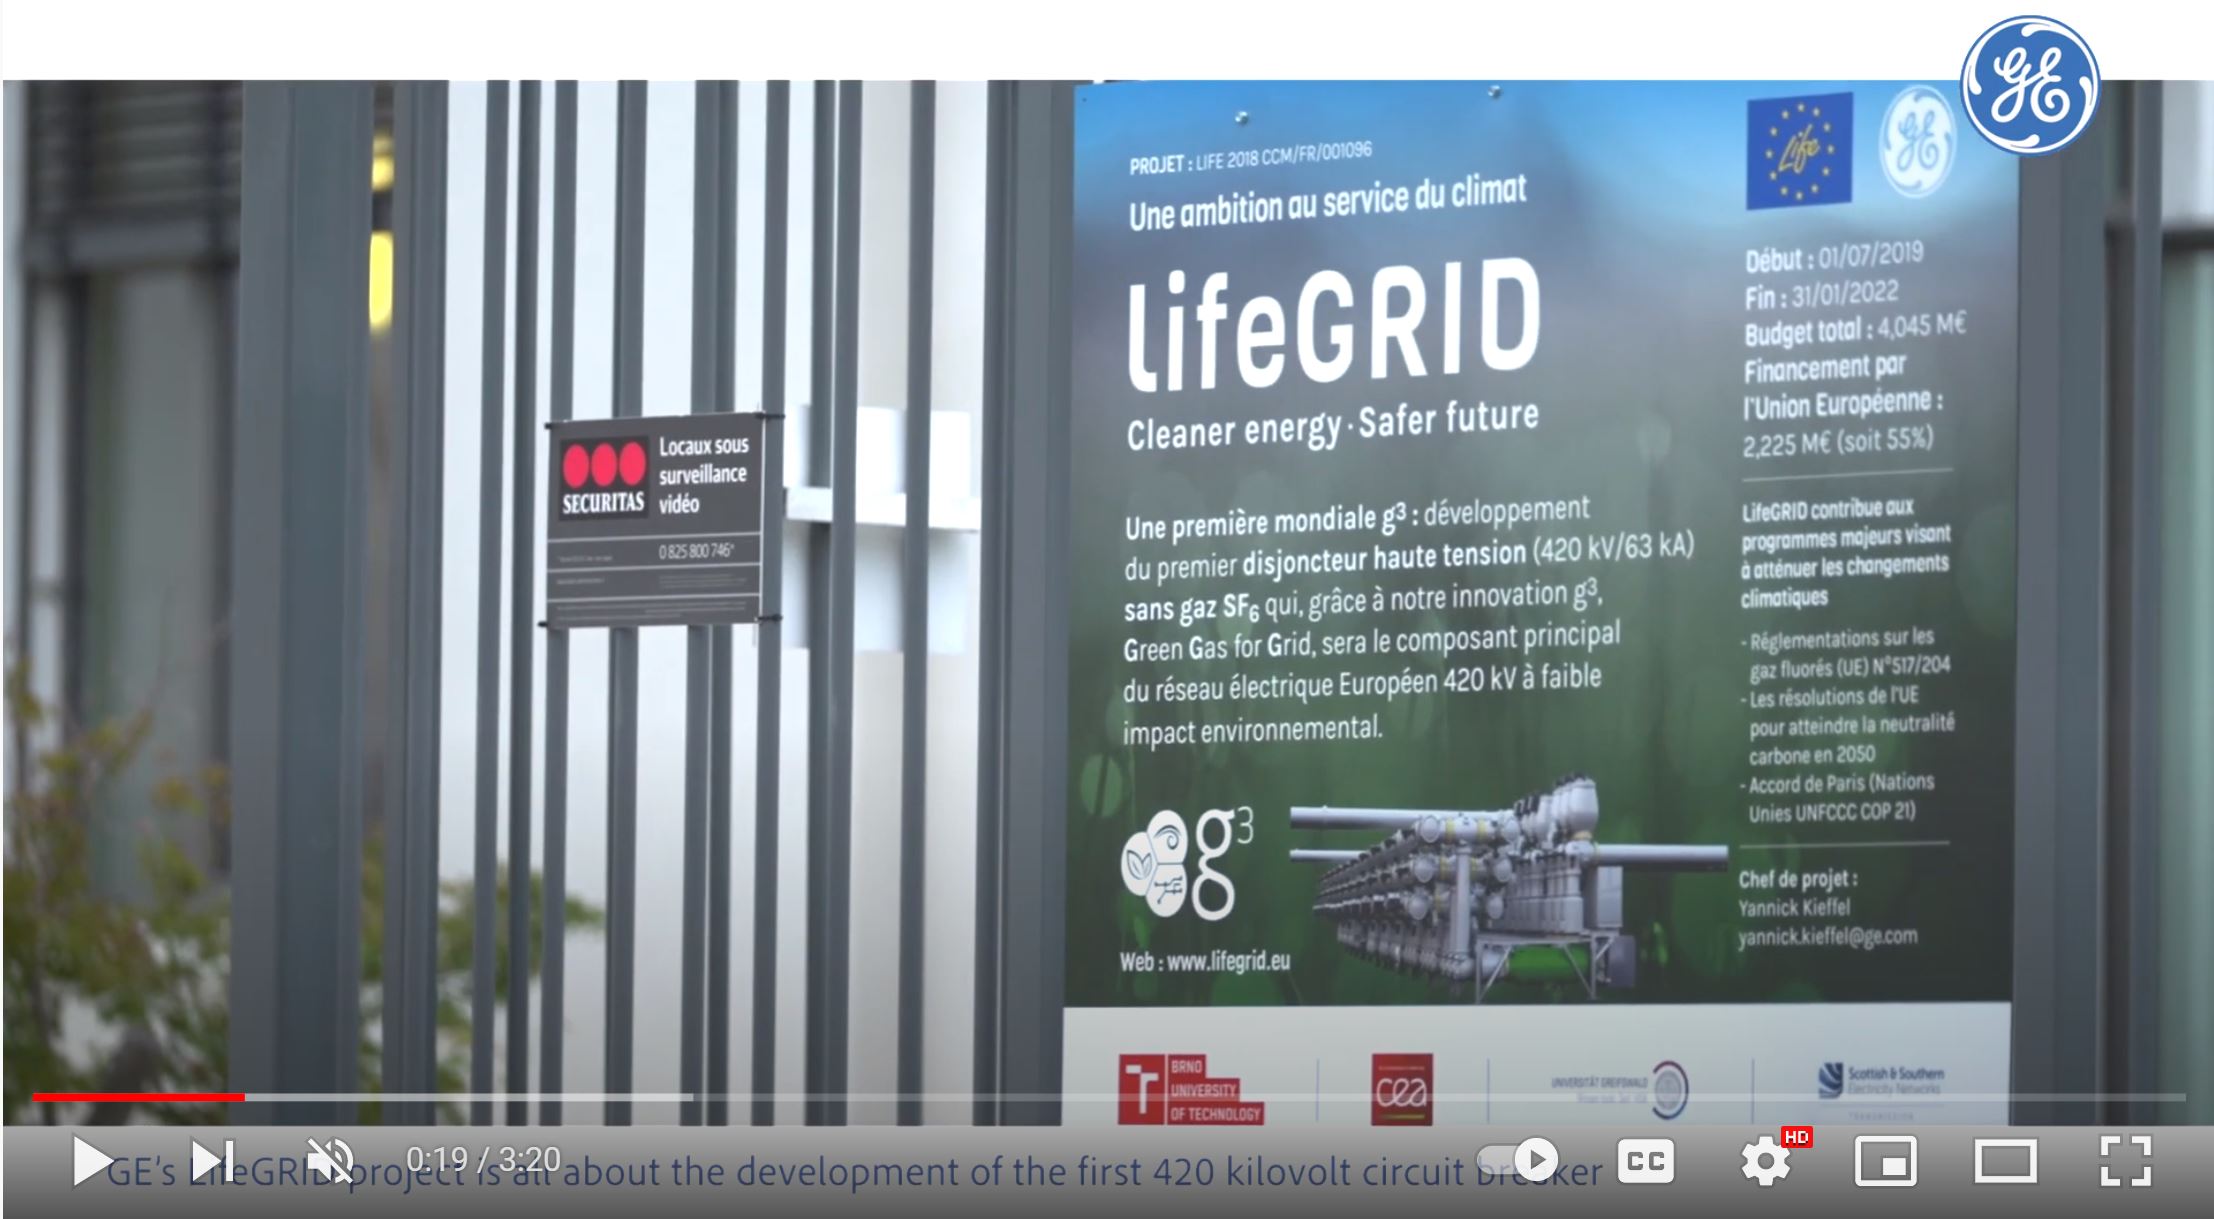 LifeGRID Project is all about the development of a 420 kV SF6-free g3 circuit breaker for gas-insulated substations. Follow here the progress step by step.